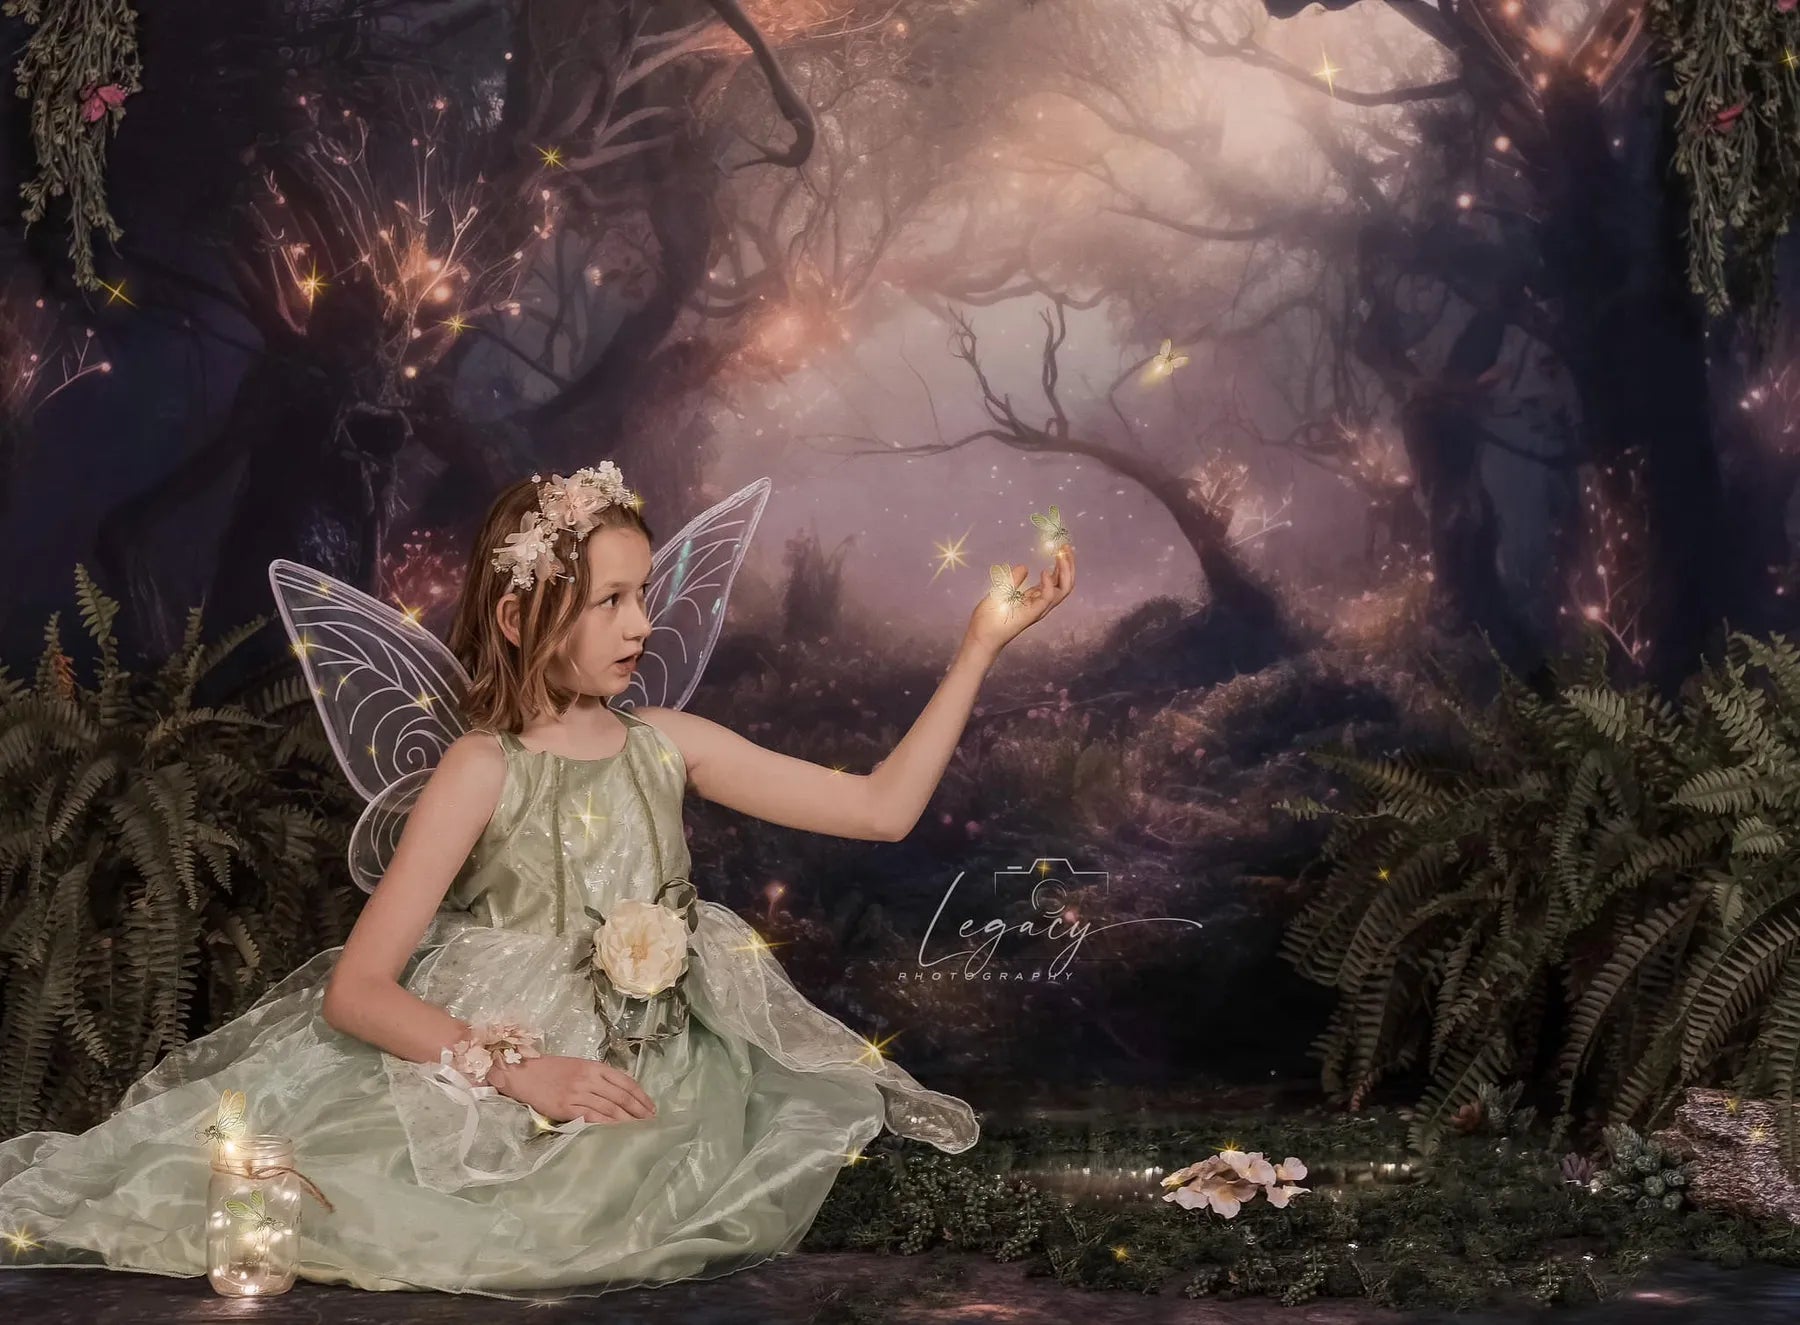 Kate Fairy Lights Forest Backdrop Designed by Happy Squirrel Design